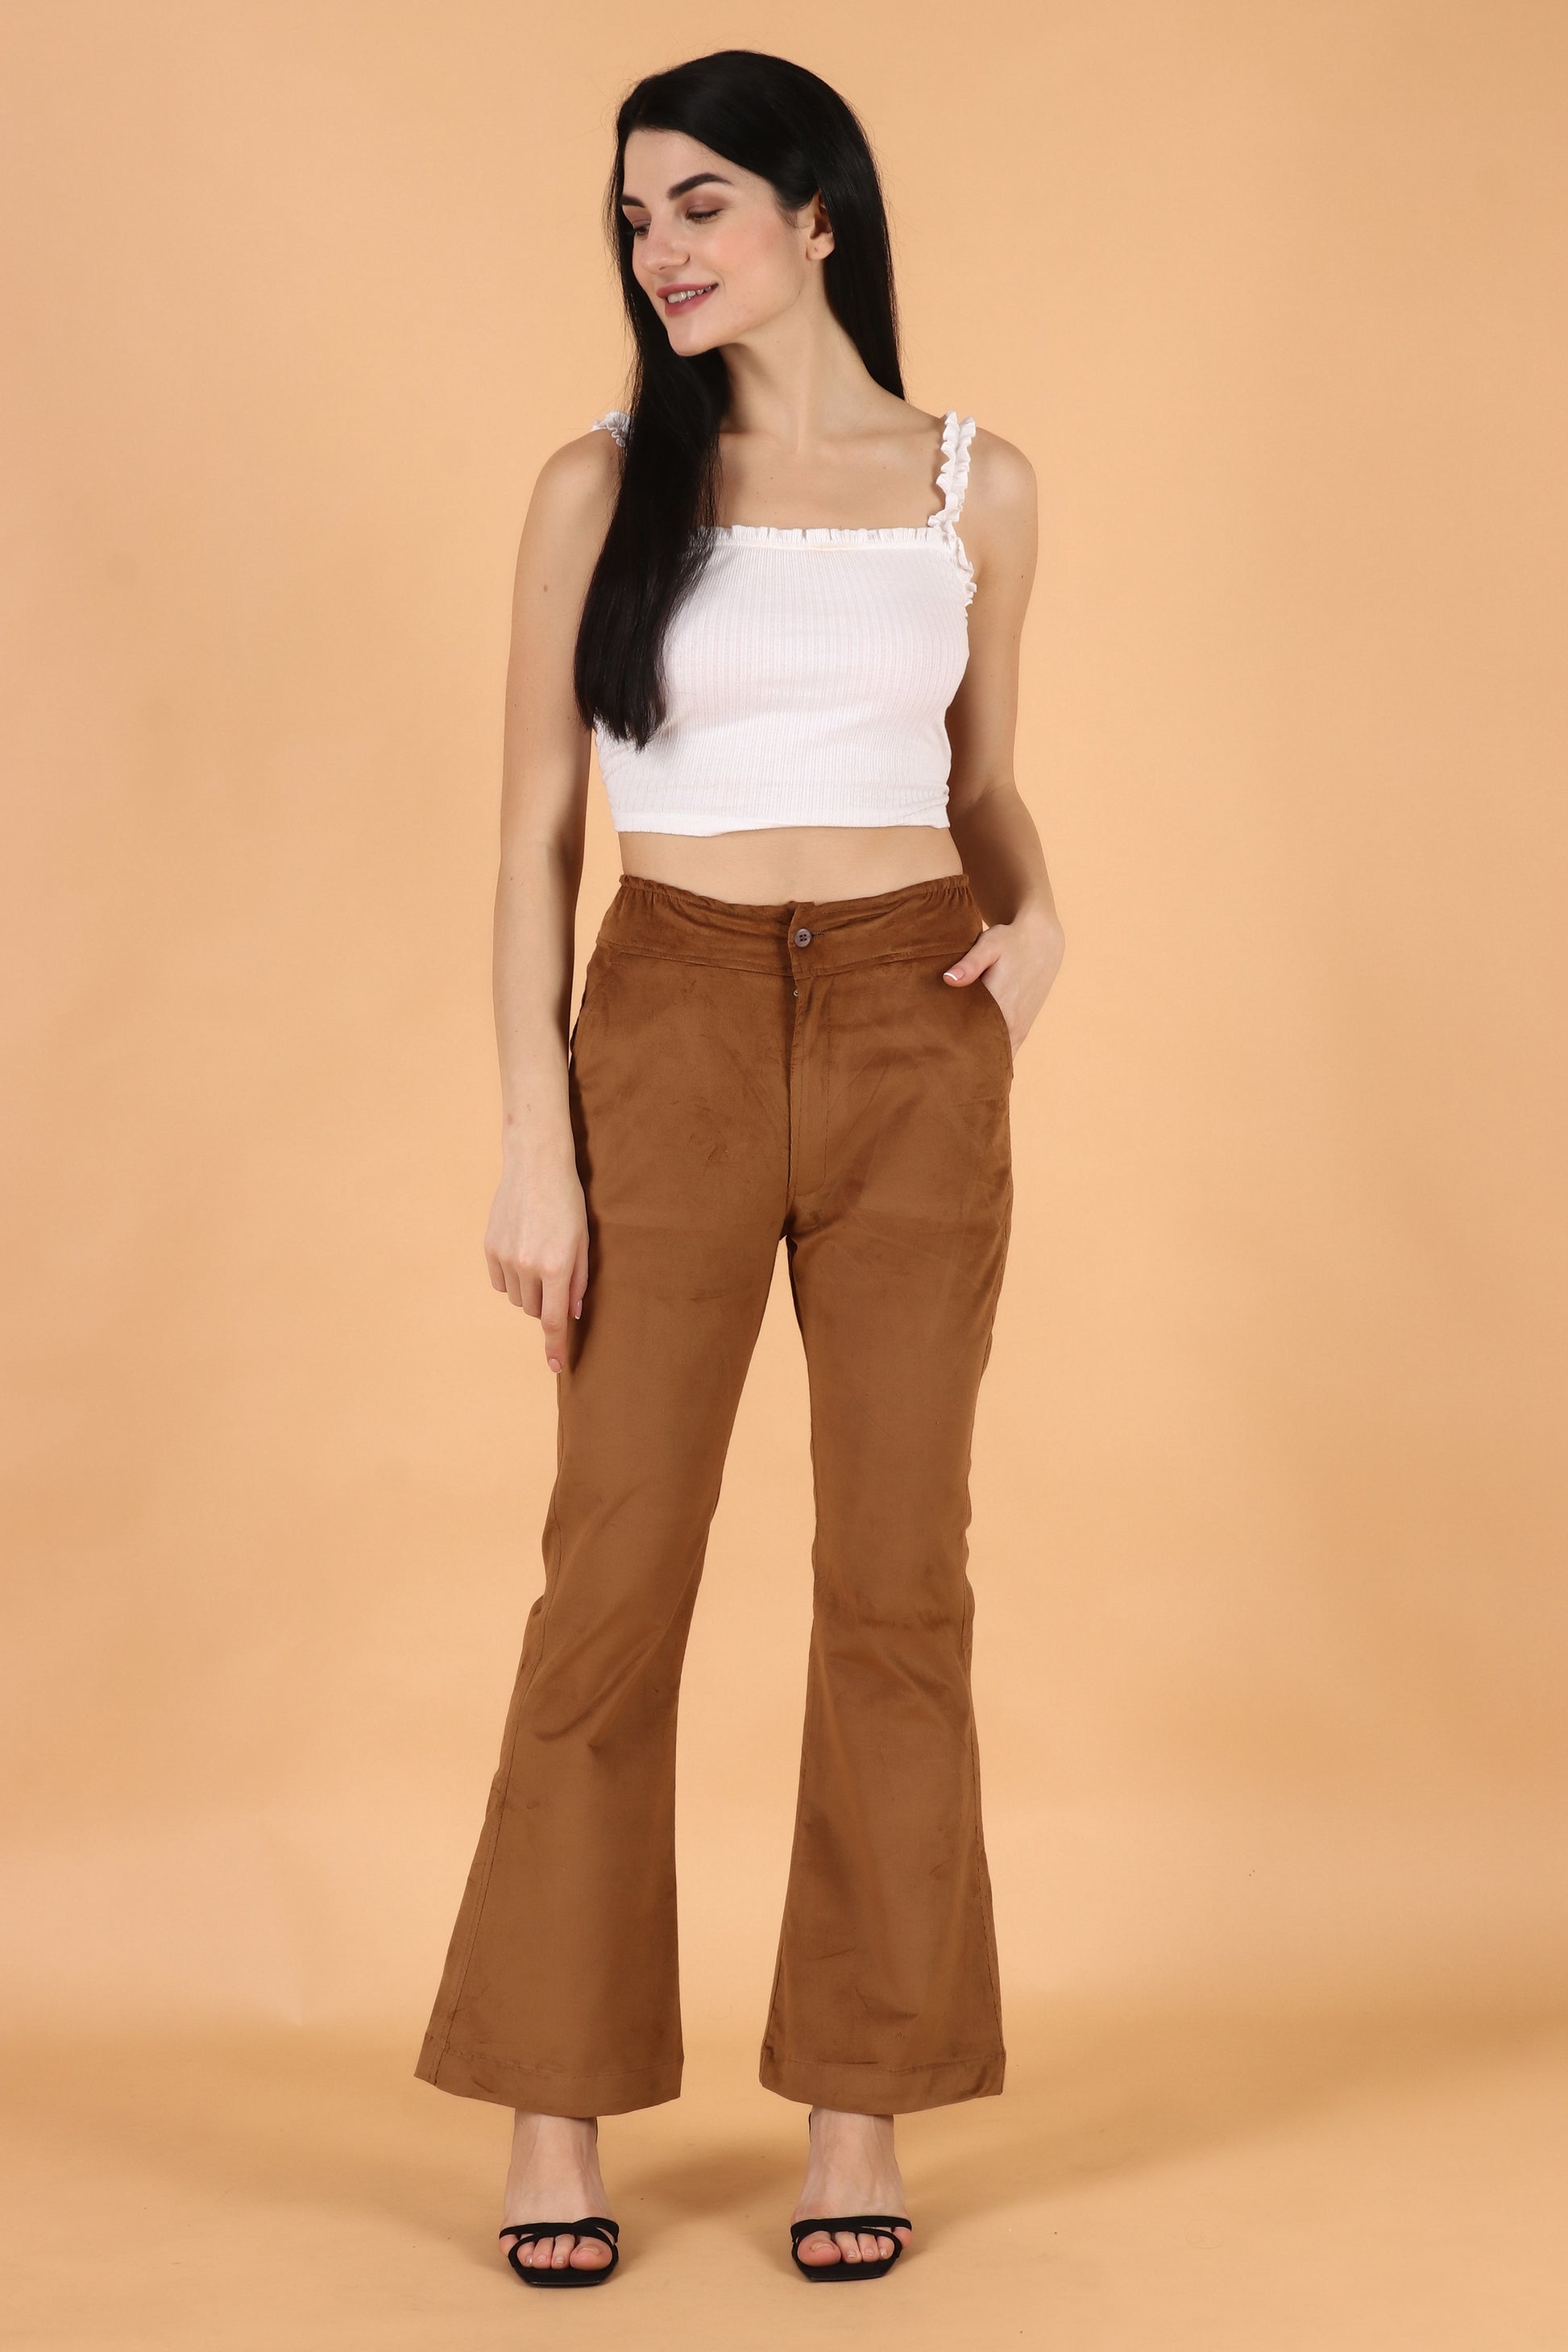 All Size, Bell Bottoms, Brown Bell Bottoms, Corduory, Corduory Bell Bottoms, Double Pockets, Double Side Pockets, Dual Side Pockets, Full Elasticized Waistline, Plus Size, Two Side Pockets